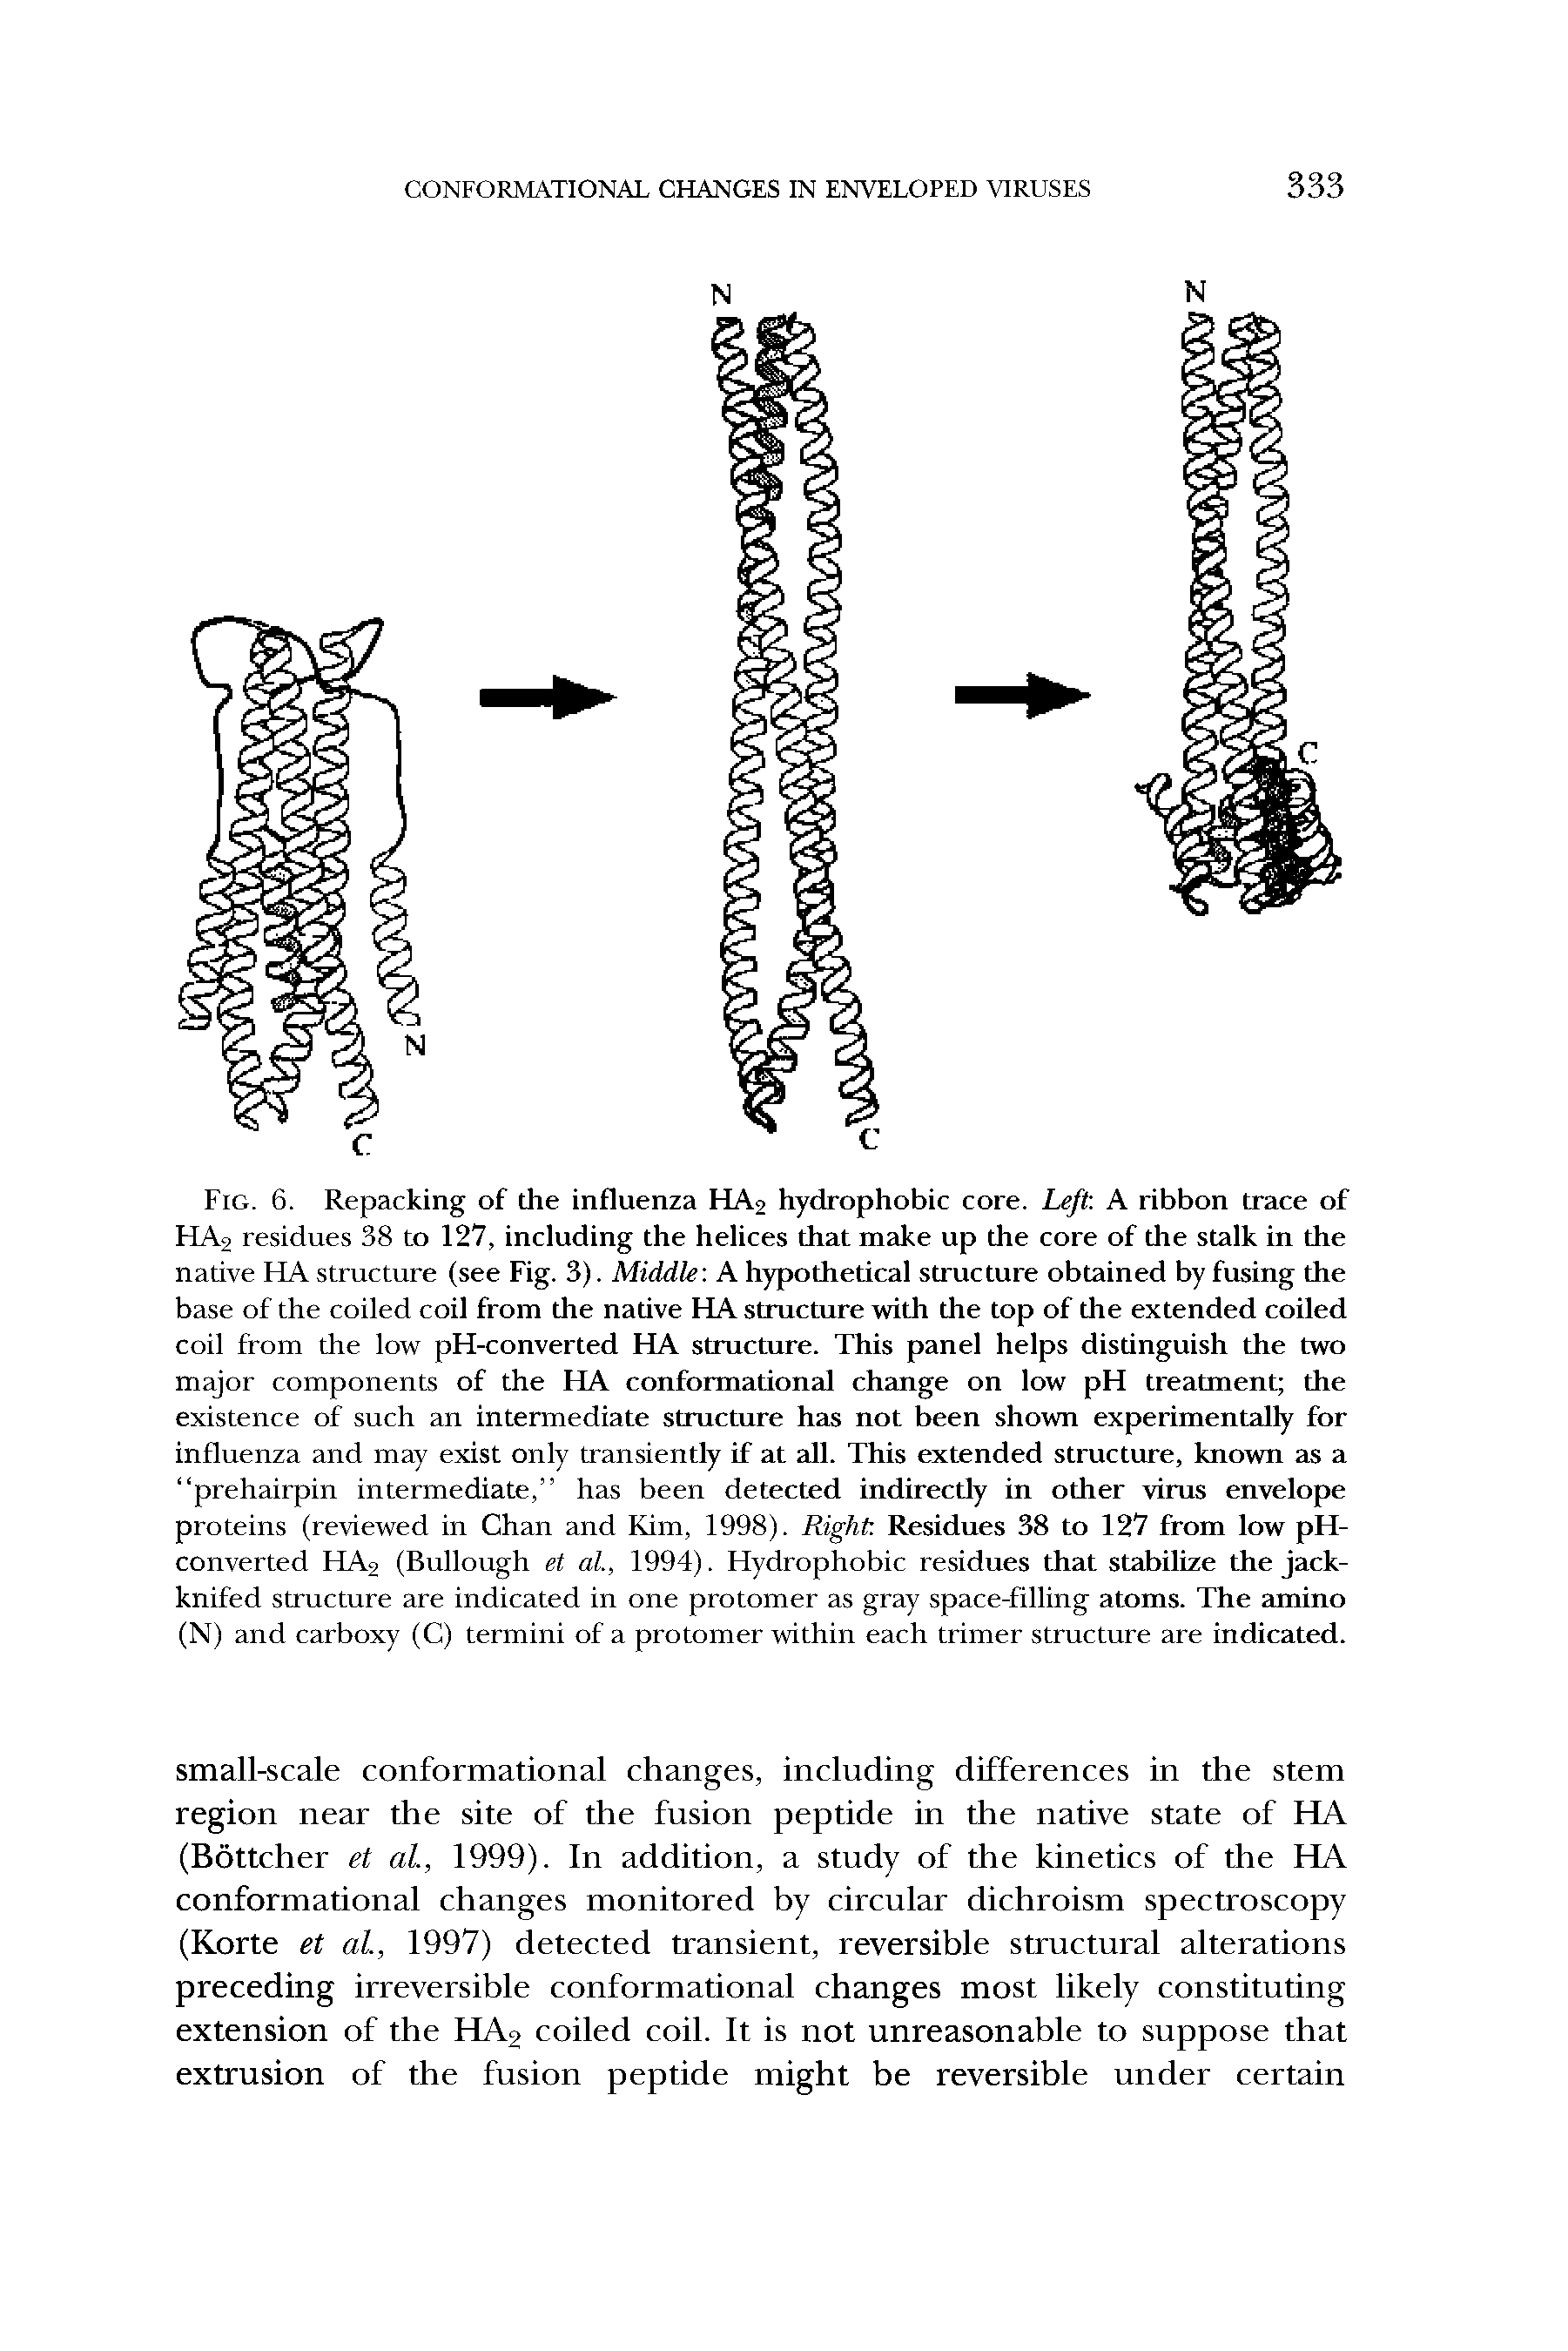 Fig. 6. Repacking of the influenza HA2 hydrophobic core. Left. A ribbon trace of HA2 residues 38 to 127, including the helices that make up the core of the stalk in the native HA structure (see Fig. 3). Middle A hypothetical structure obtained by fusing the base of the coiled coil from the native HA structure with the top of the extended coiled coil from the low pH-converted HA structure. This panel helps distinguish the two major components of the HA conformational change on low pH treatment the existence of such an intermediate structure has not been shovm experimentally for influenza and may exist only transiently if at all. This extended structure, known as a prehairpin intermediate, has been detected indirectly in other virus envelope proteins (reviewed in Chan and Kim, 1998). Right Residues 38 to 127 from low pH-converted HA2 (Bullough et al, 1994). Hydrophobic residues that stabilize the jackknifed structure are indicated in one protomer as gray space-filling atoms. The amino (N) and carboxy (C) termini of a protomer within each trimer structure are indicated.